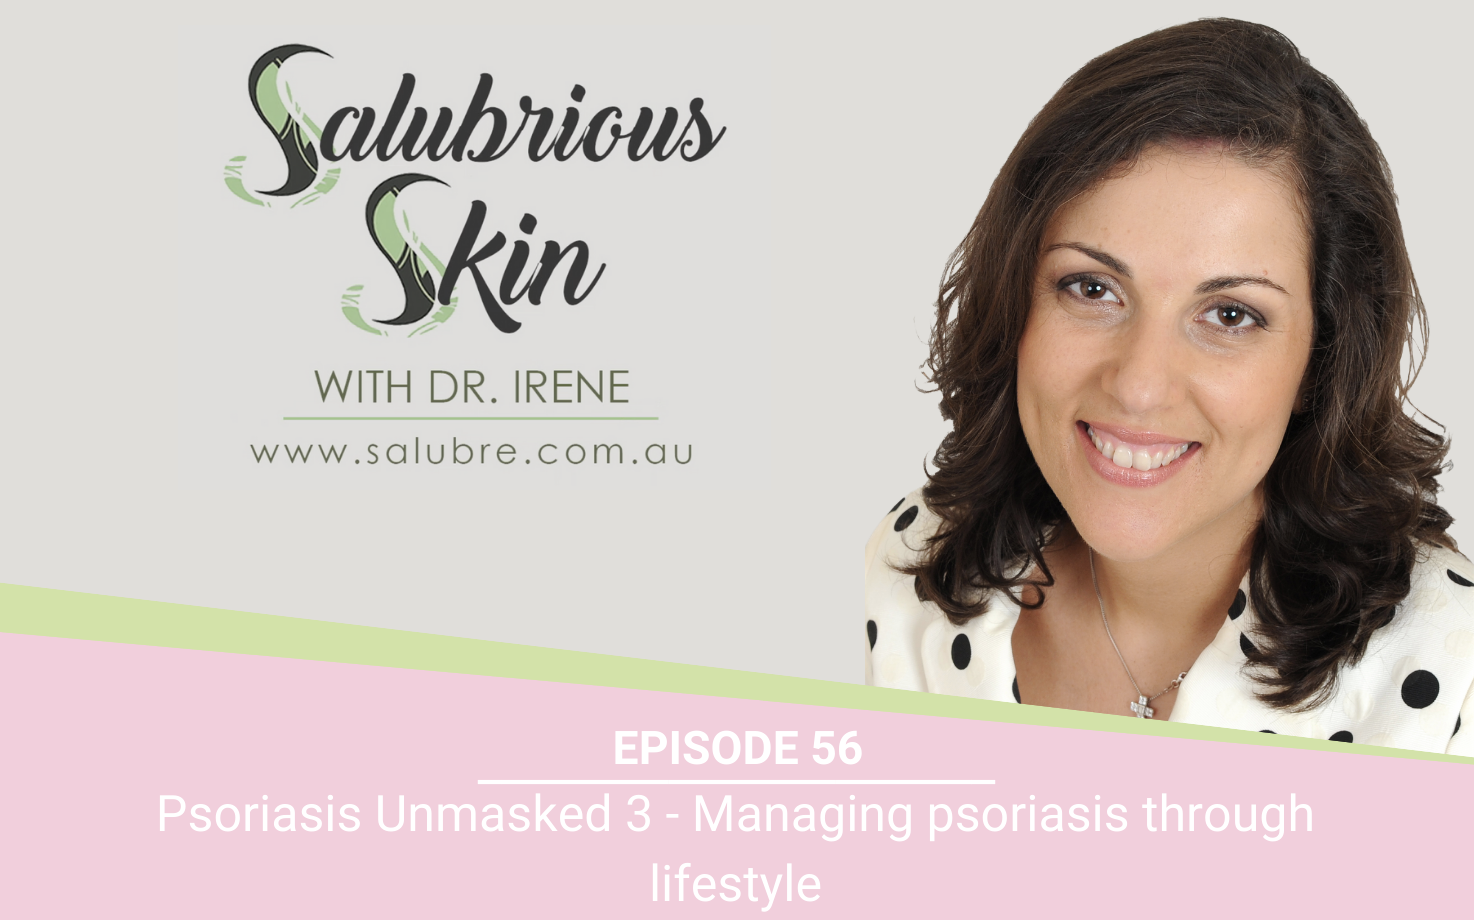 Podcast 56: Psoriasis Unmasked 3 - A Lifestyle that is conducive to the management of psoriasis